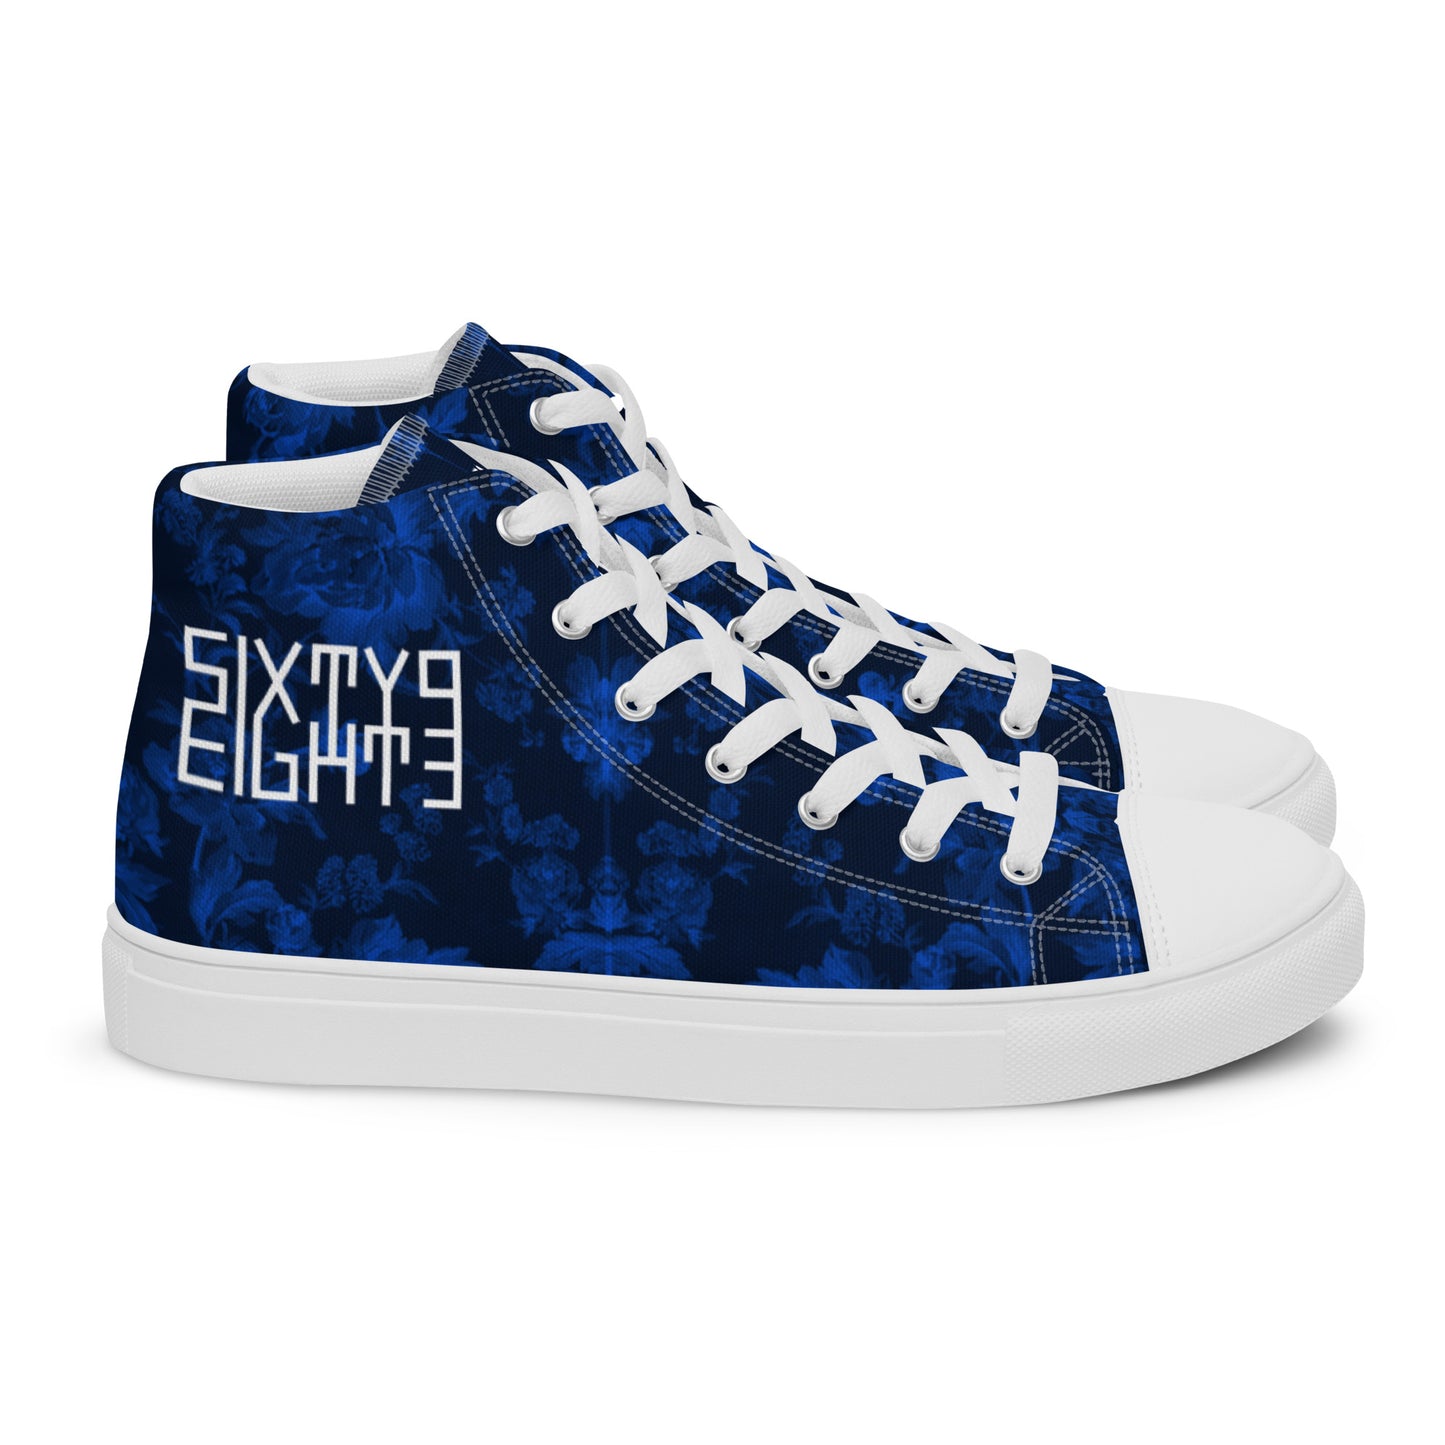 Sixty Eight 93 Logo White Floral Blue & Black Women’s High Top Shoes